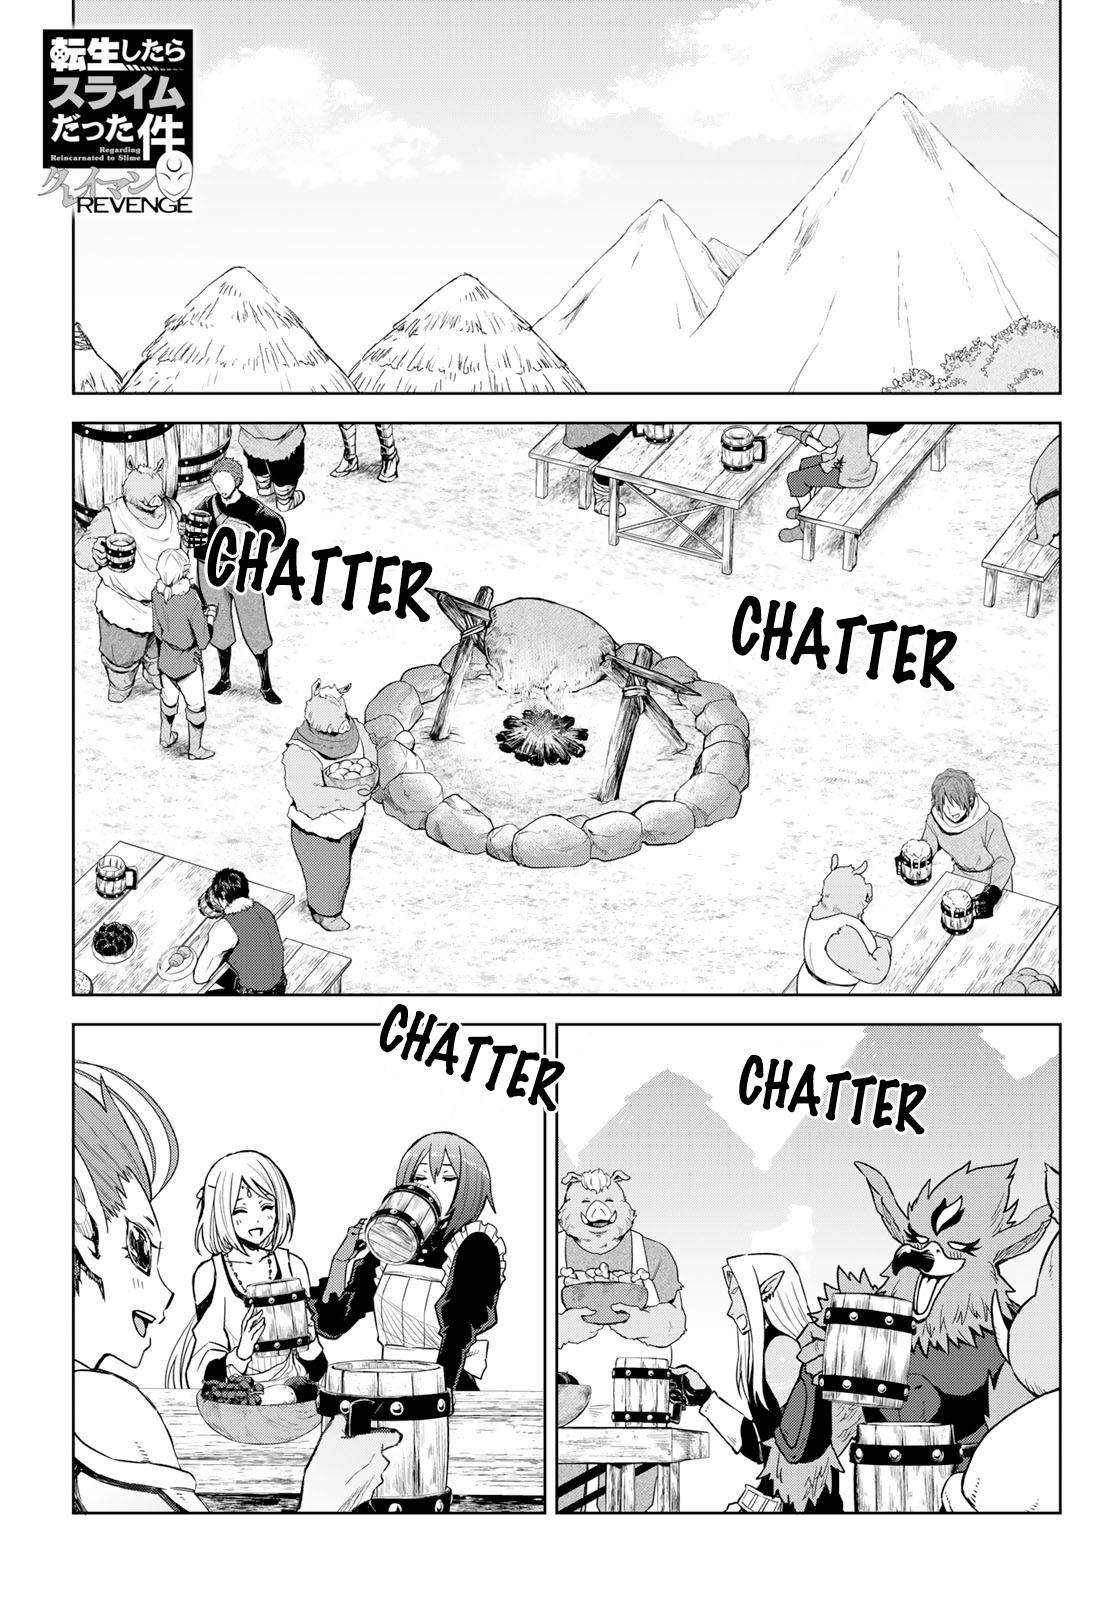 That Time I Got Reincarnated as a Slime - Clayman - chapter 15 - #1